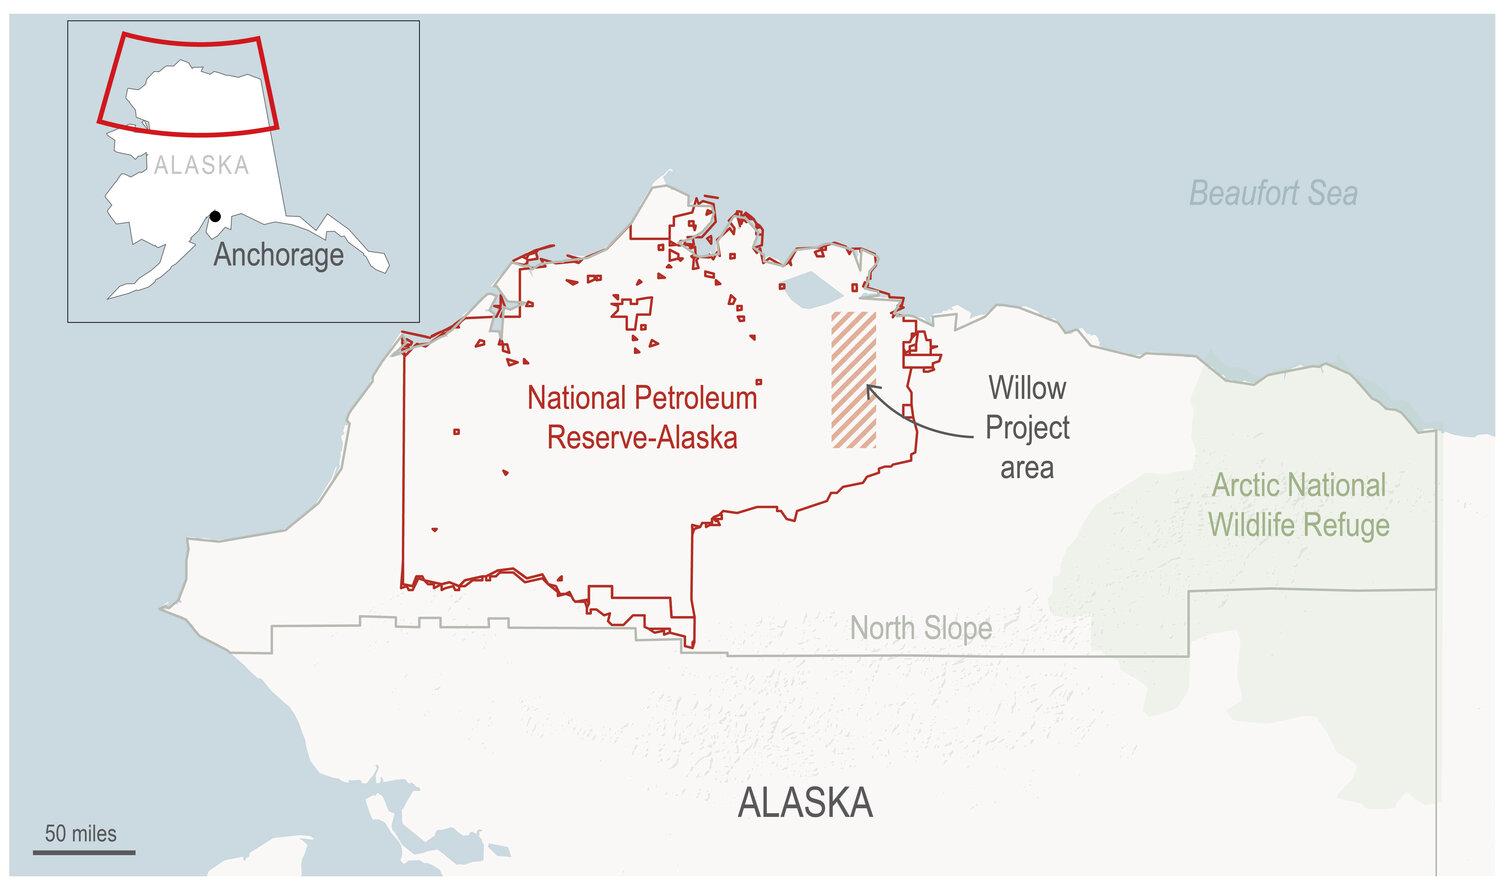 Supporters say a major oil project President Joe Biden is OK’ing on Alaska’s petroleum-rich North Slope represents an economic lifeline for Indigenous communities while environmentalists say it runs counter to his climate goals.